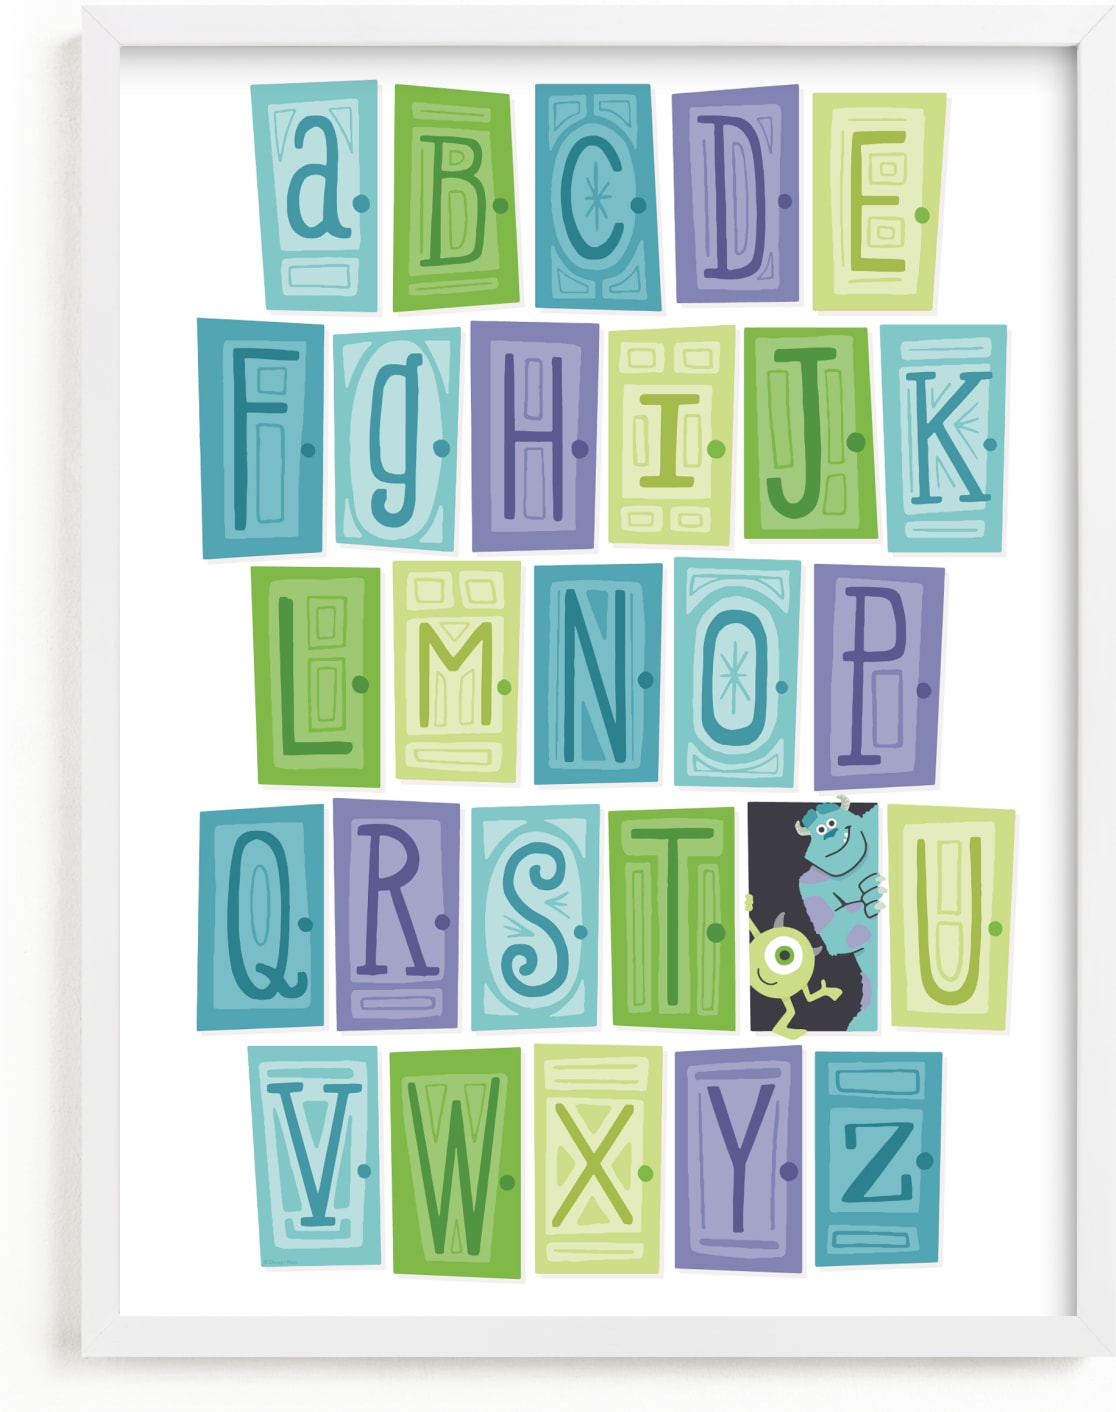 This is a blue disney art by Jessie Steury called Alphabet Doors from Disney and Pixar's Monster's Inc .